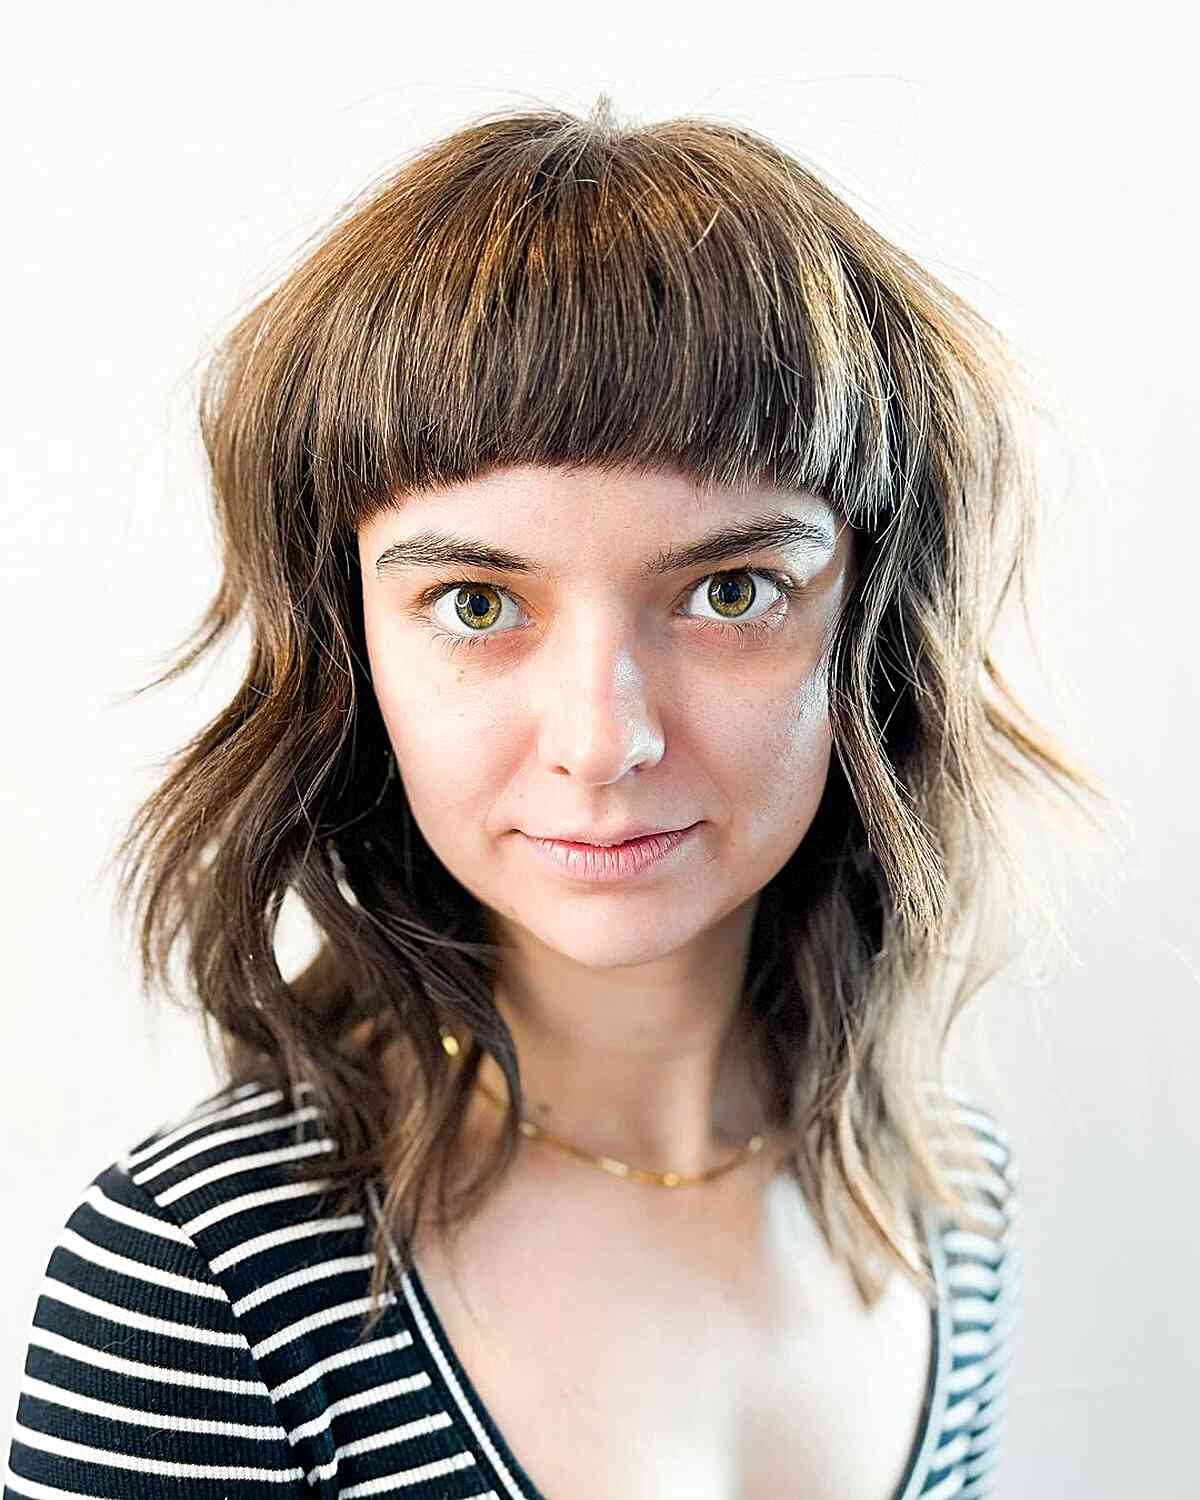 40 Сharming Short Fringe Hairstyles for Any Taste and Occasion